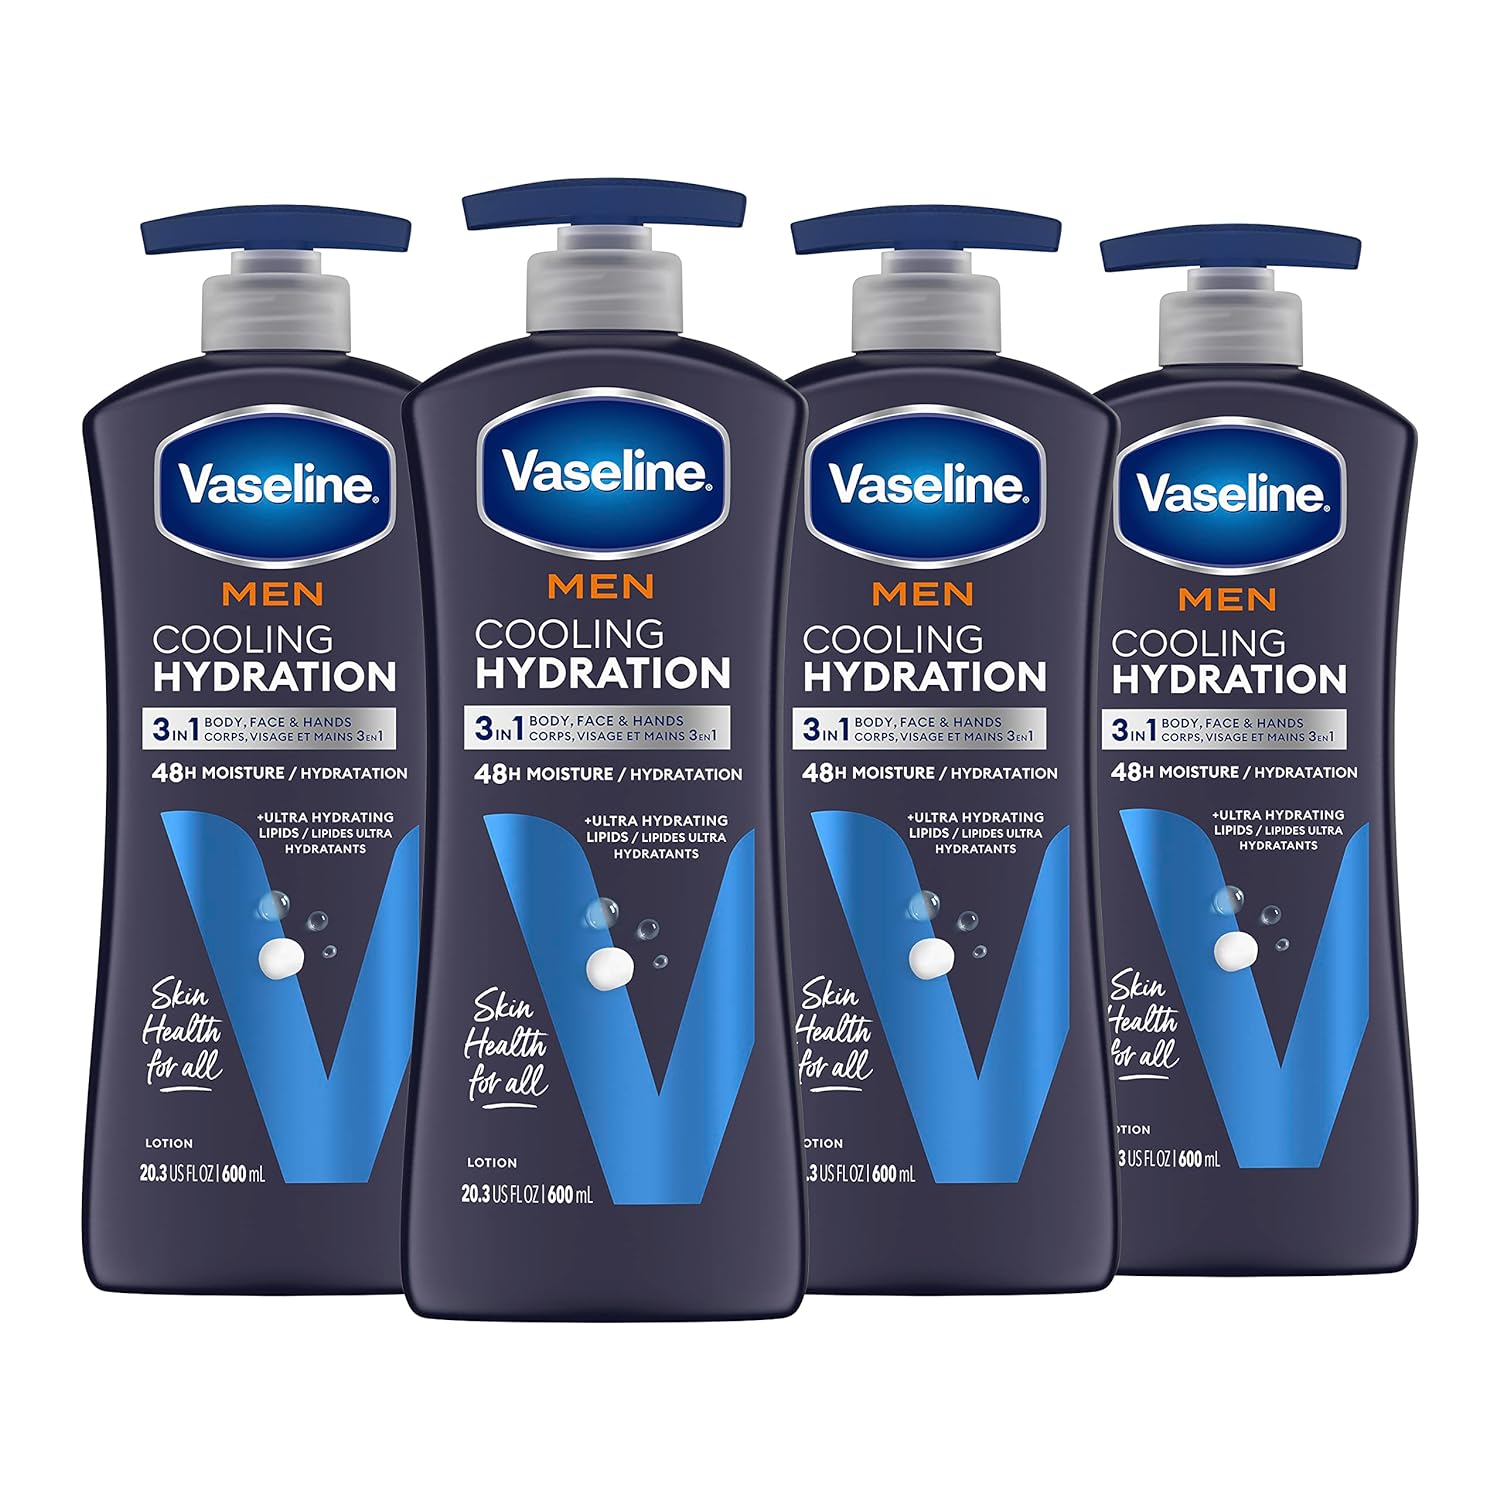 Vaseline Men Cooling Hydration 3-in-1 Lotion Review